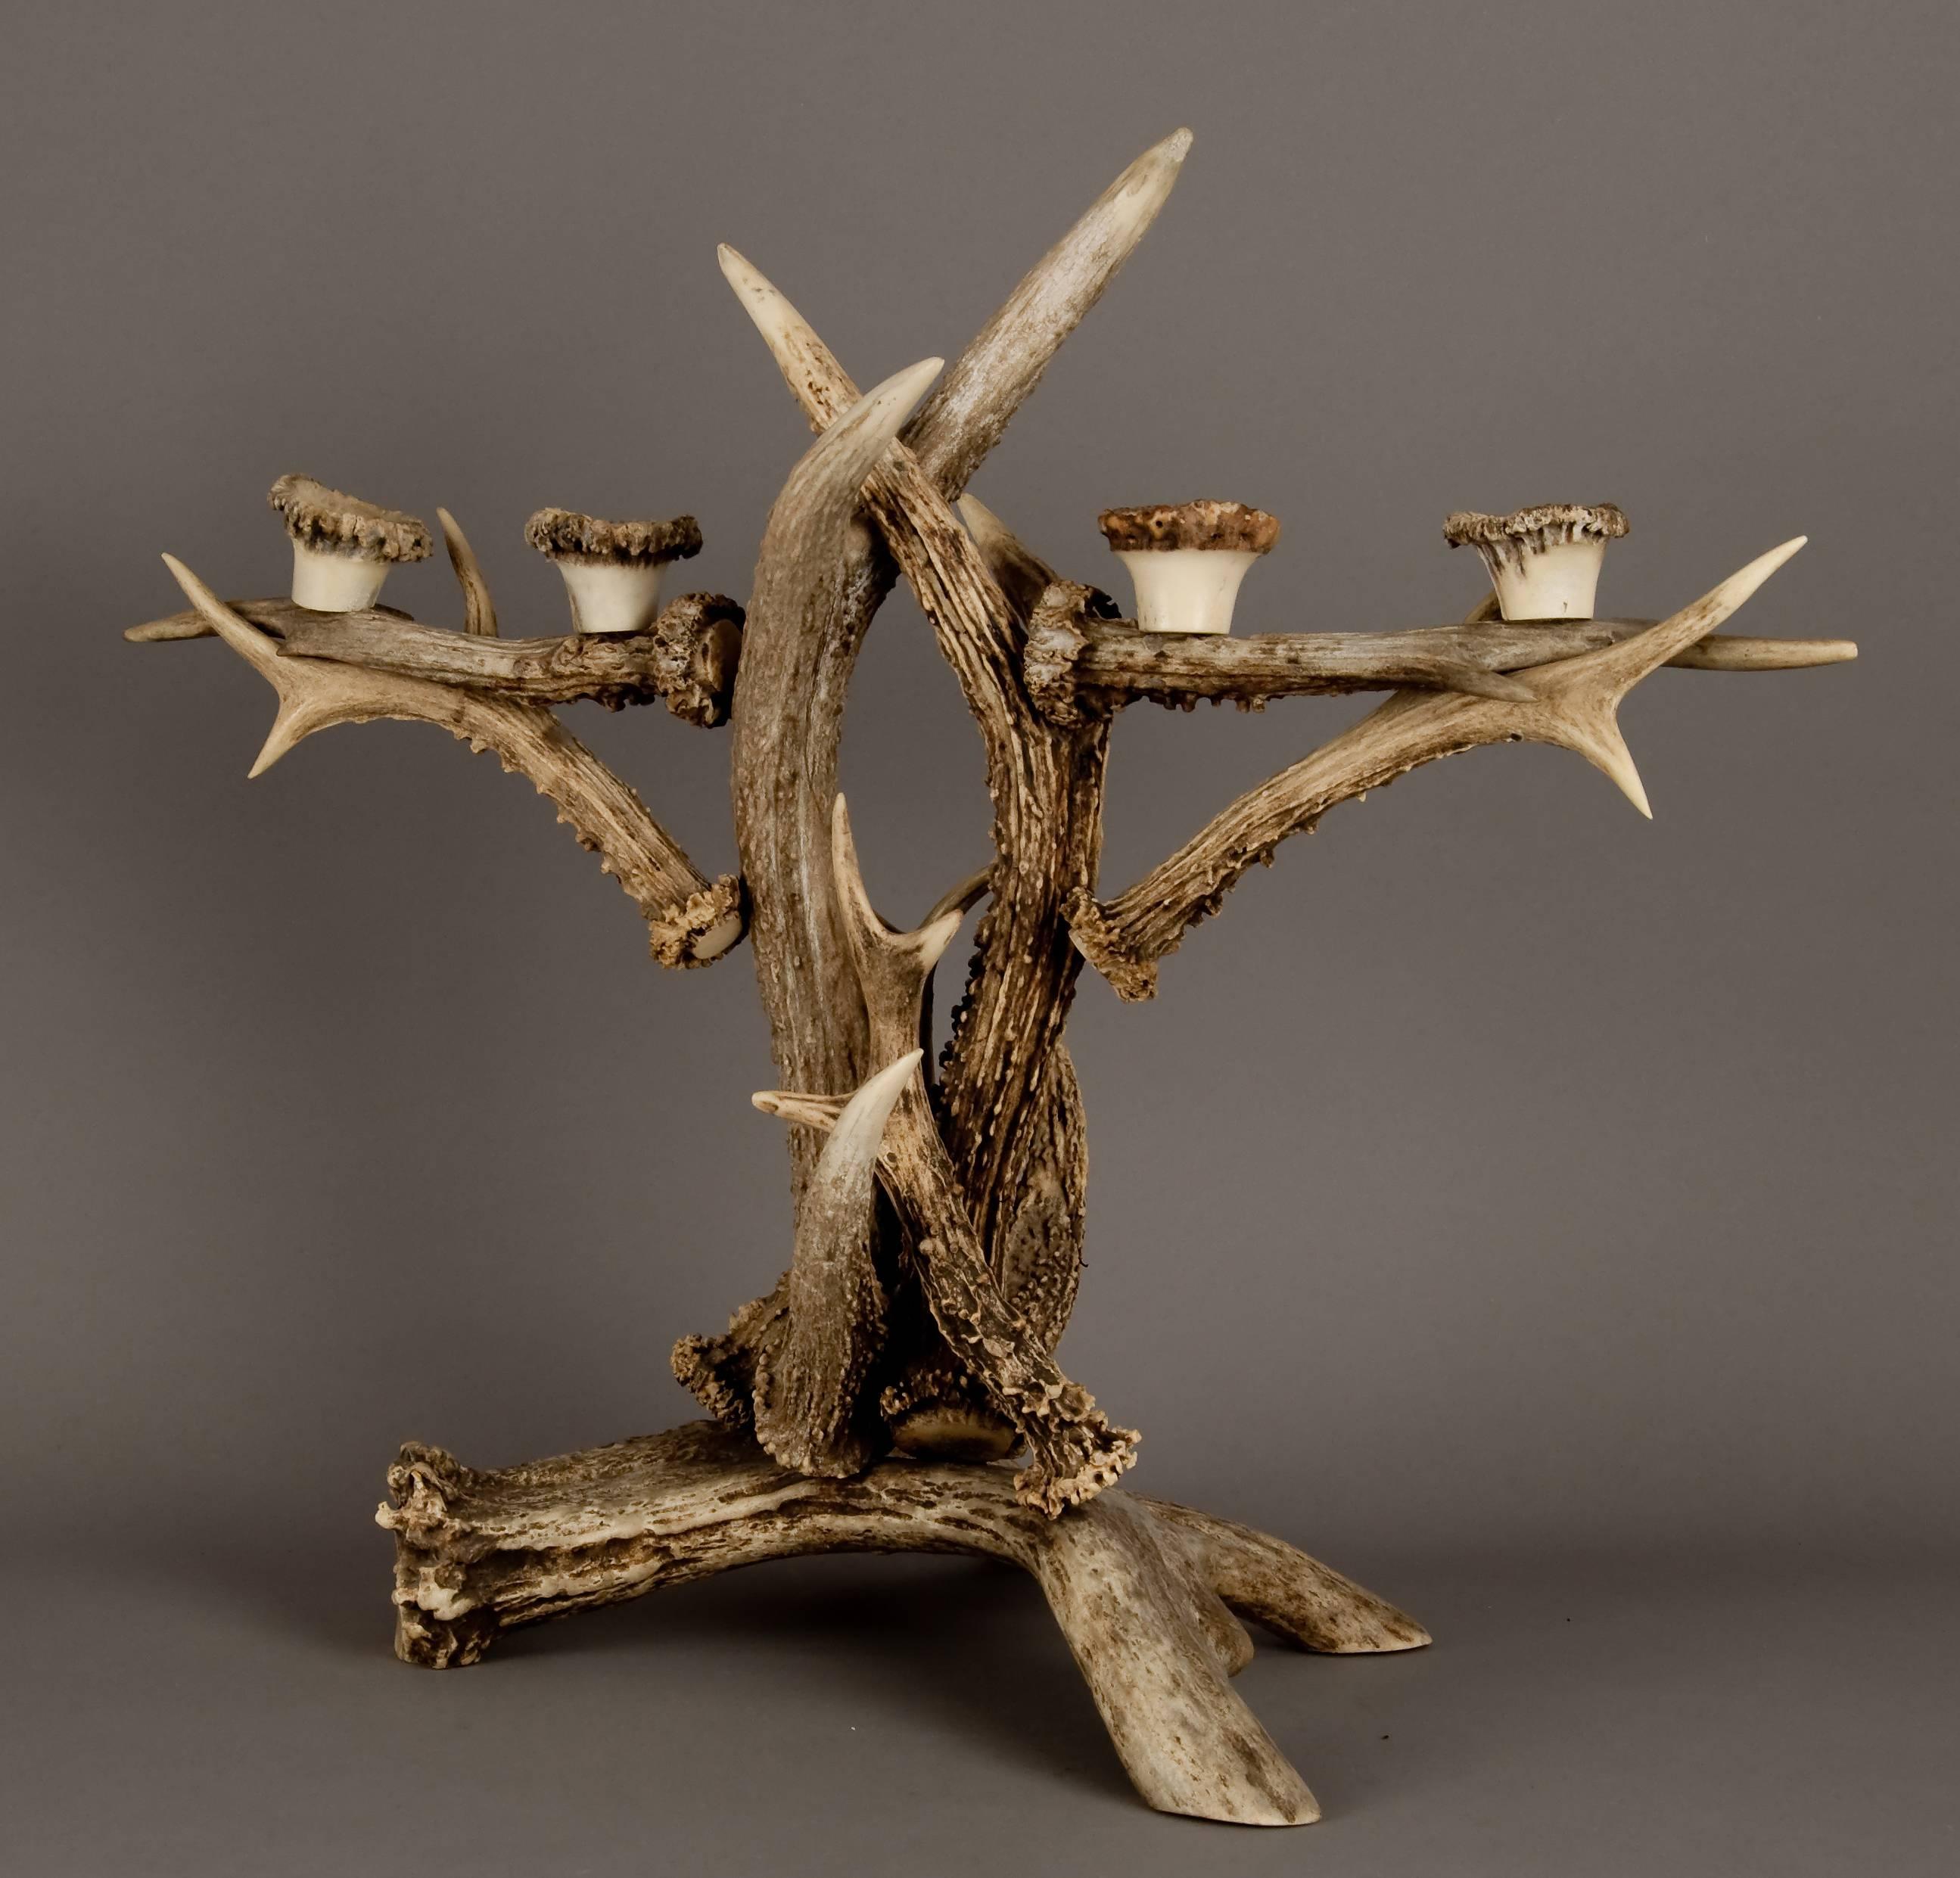 Antique large antler candleholder made of real antlers from the deer and elk, manufactured, circa 1900.